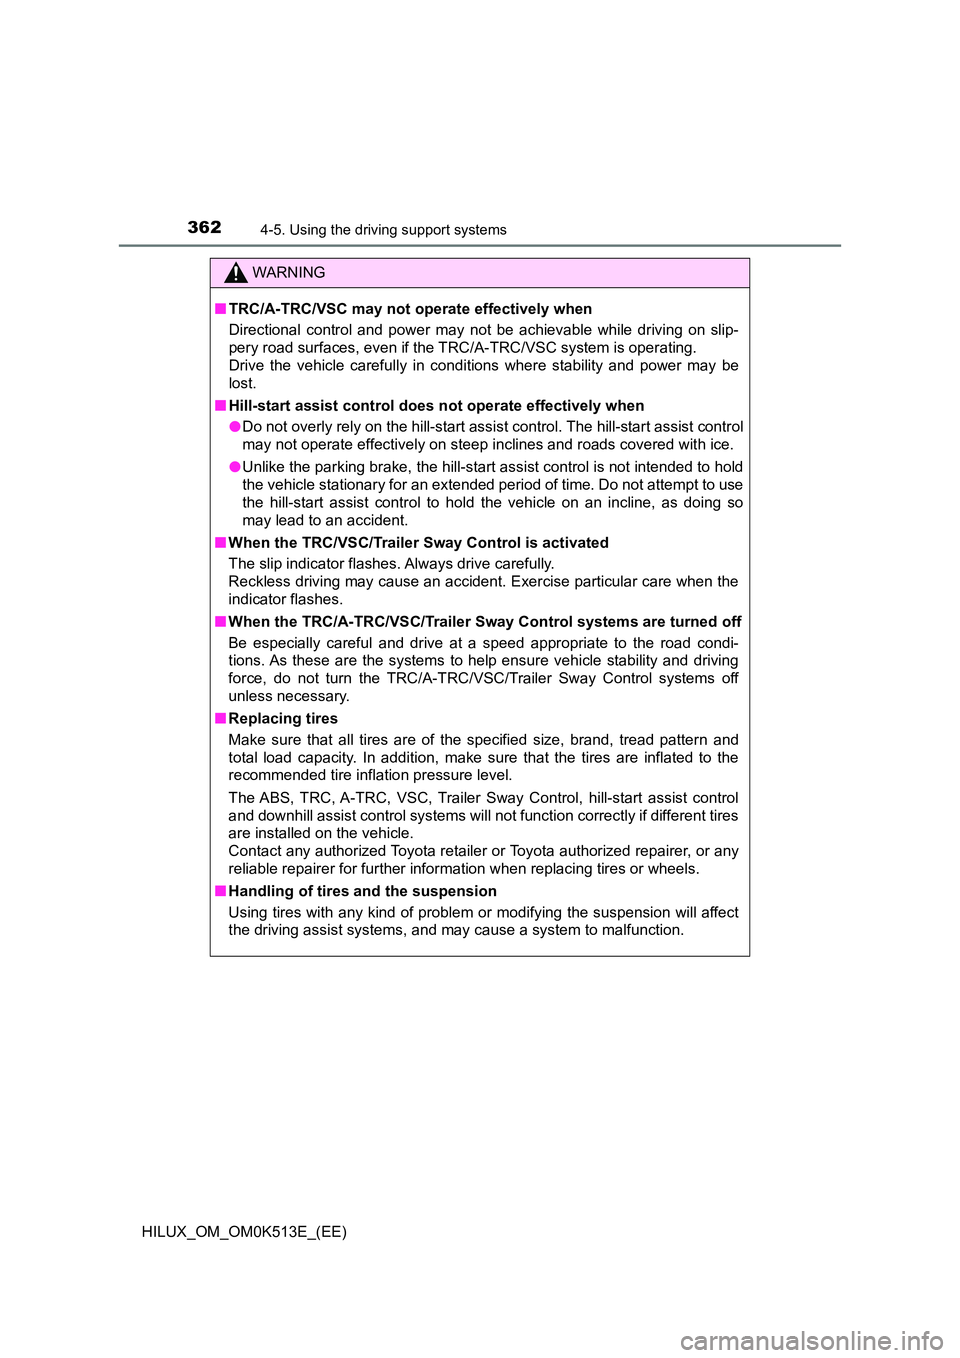 TOYOTA HILUX 2021  Owners Manual (in English) 3624-5. Using the driving support systems
HILUX_OM_OM0K513E_(EE)
WARNING
�QTRC/A-TRC/VSC may not operate effectively when 
Directional control and power may not be achievable while driving on slip- 
p